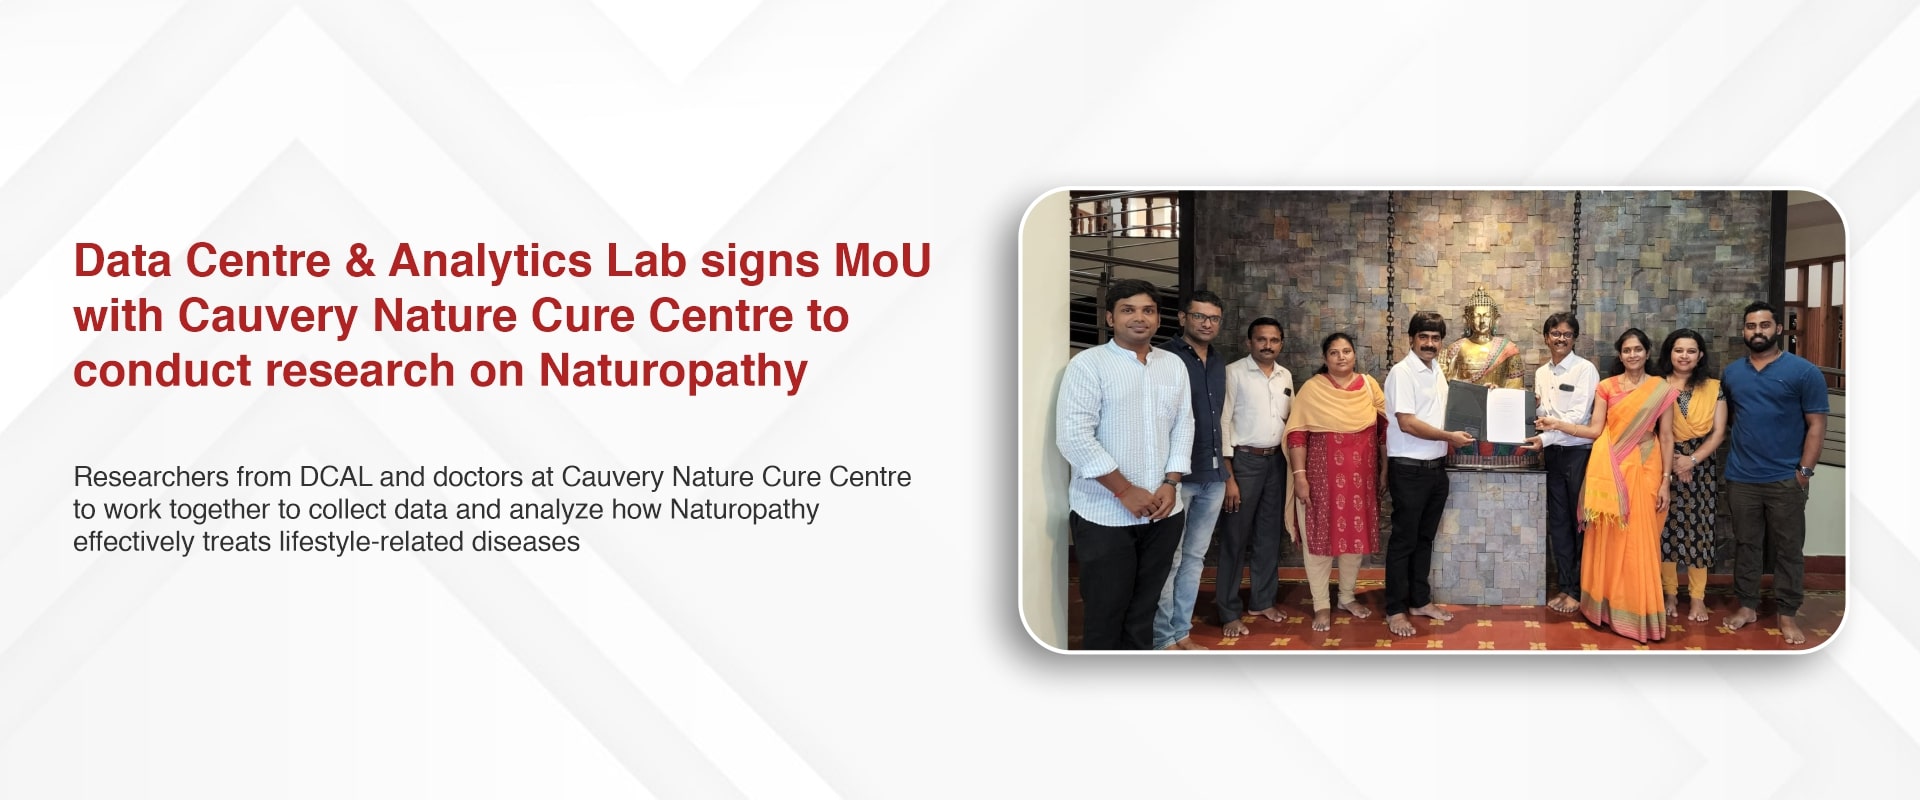 Data Centre & Analytics Lab signs MoU with Cauvery Nature Cure Centre to conduct research on Naturopathy